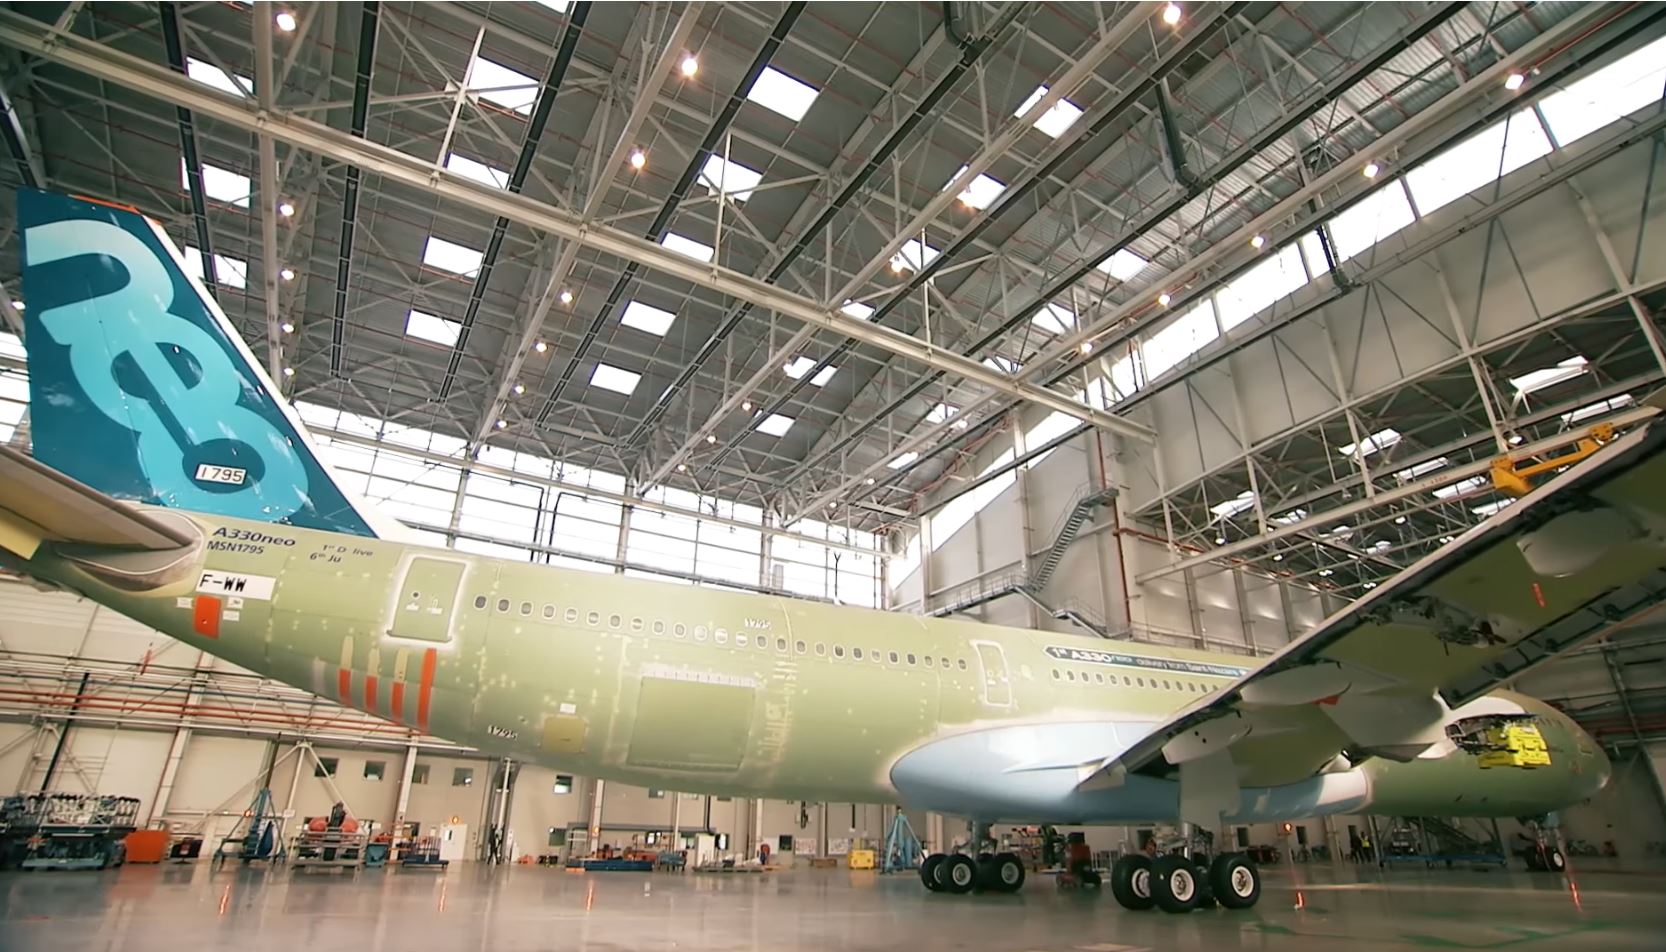 In the making: Assembling the no. 1 A330neo